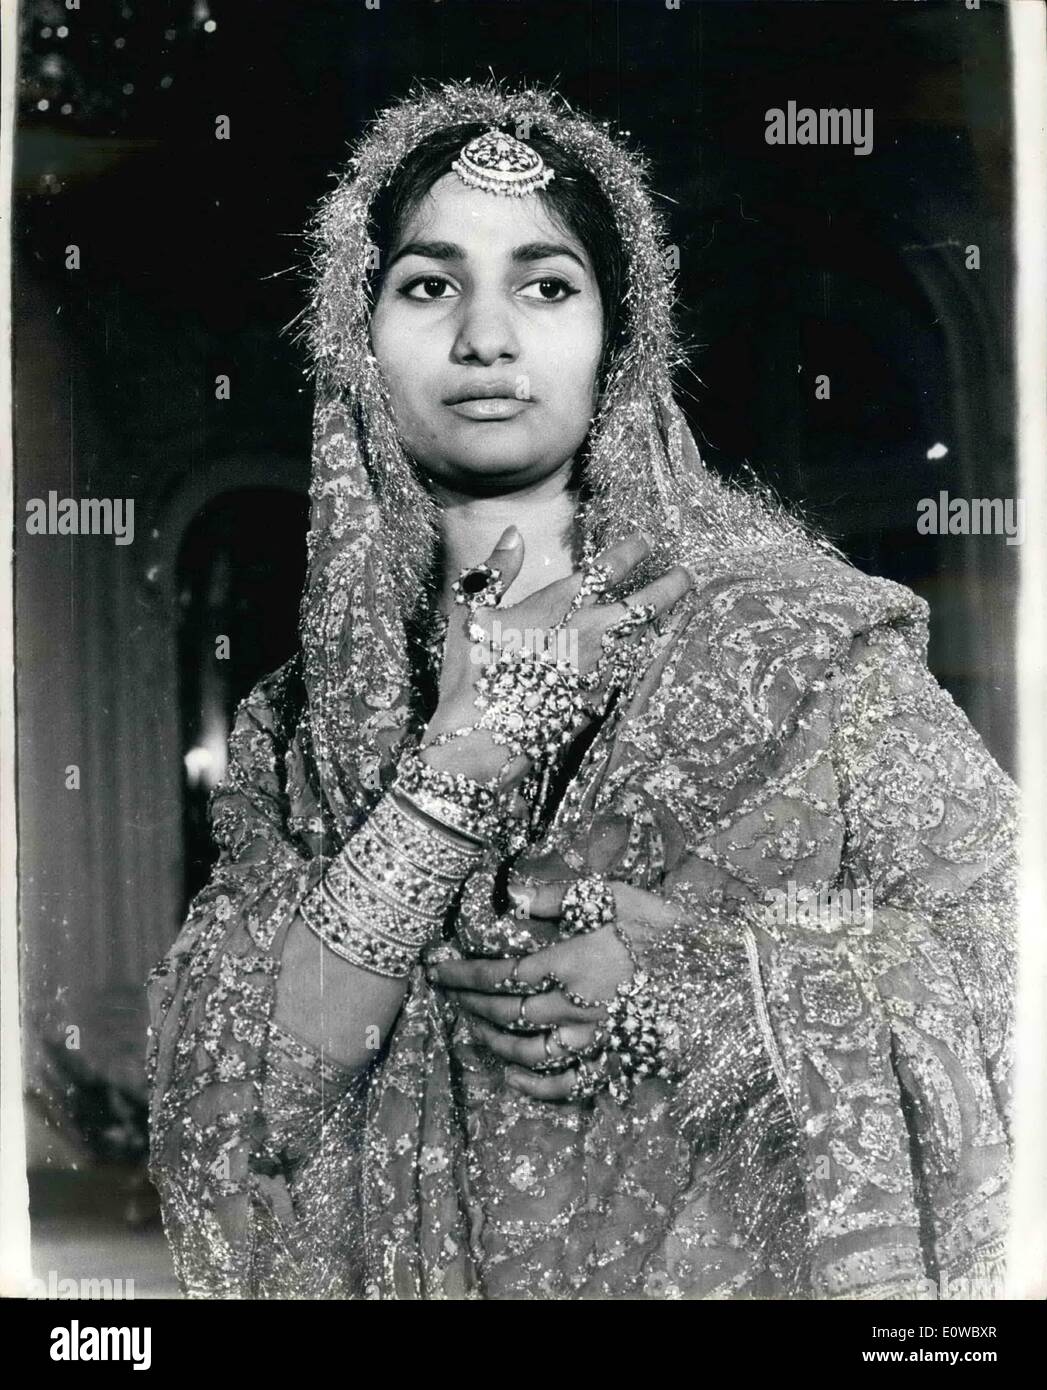 Apr. 17, 1962 - 17-4-62 That &pound;22,000 dress. Here's a model with a difference. Mrs. Safia Fayyaz, 25-year old Pakistani beauty, is not only wealthy enough to buy the &pound;7,500 golden wedding dress she is wearing in the picture, she actually owns it. The &pound;15,000 worth of jewelry which goes with it are also hers. She, her mother and grandmother, were all married in the dress. Mrs. Fayyaz, wife of a millionaire and daughter of the richest man in Pakistan, came to England with 10 other Pakistani society women to model in a fashion show in London hotel last night Stock Photo